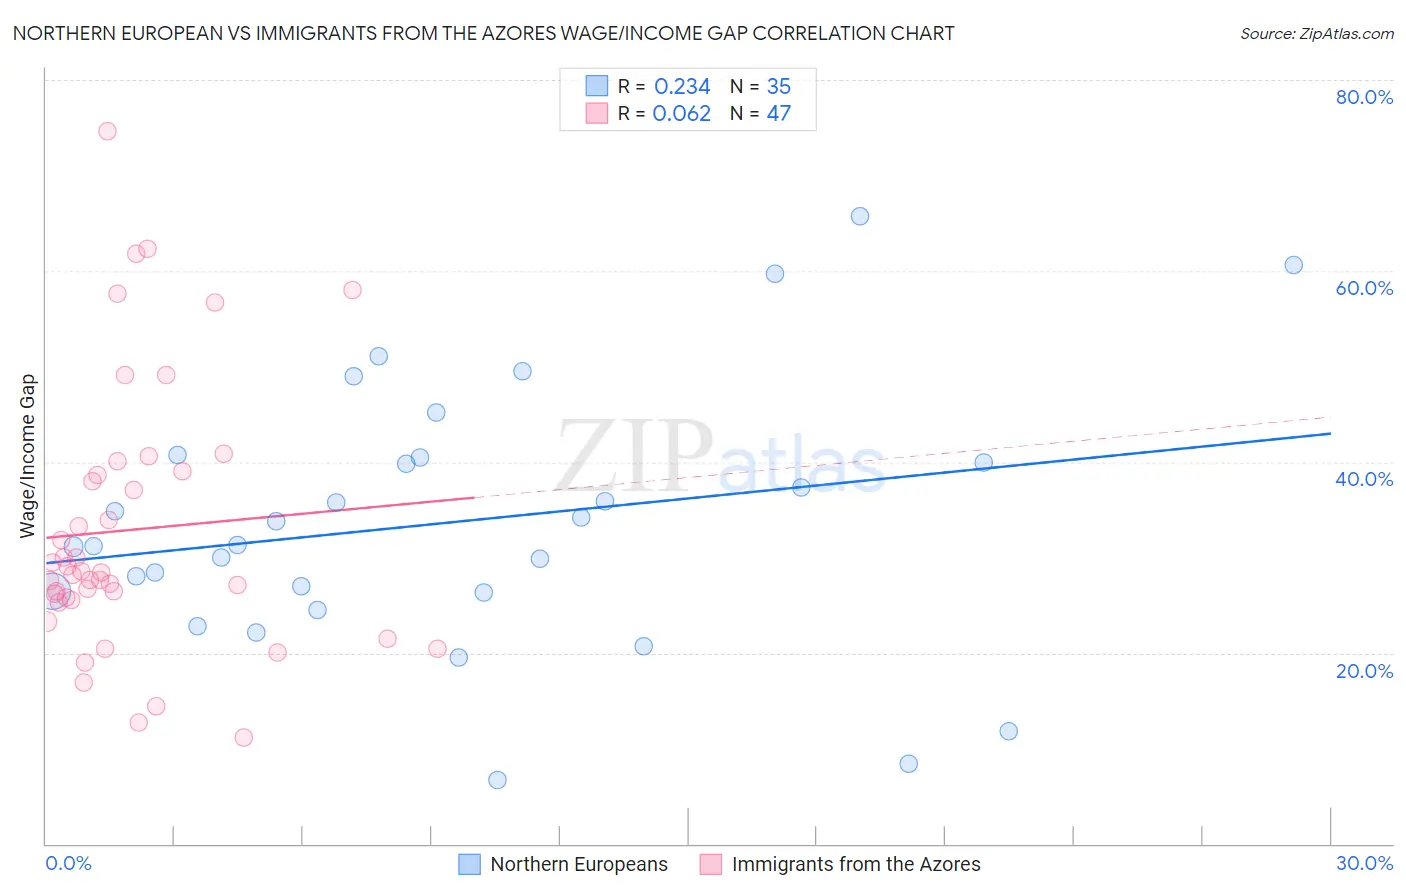 Northern European vs Immigrants from the Azores Wage/Income Gap